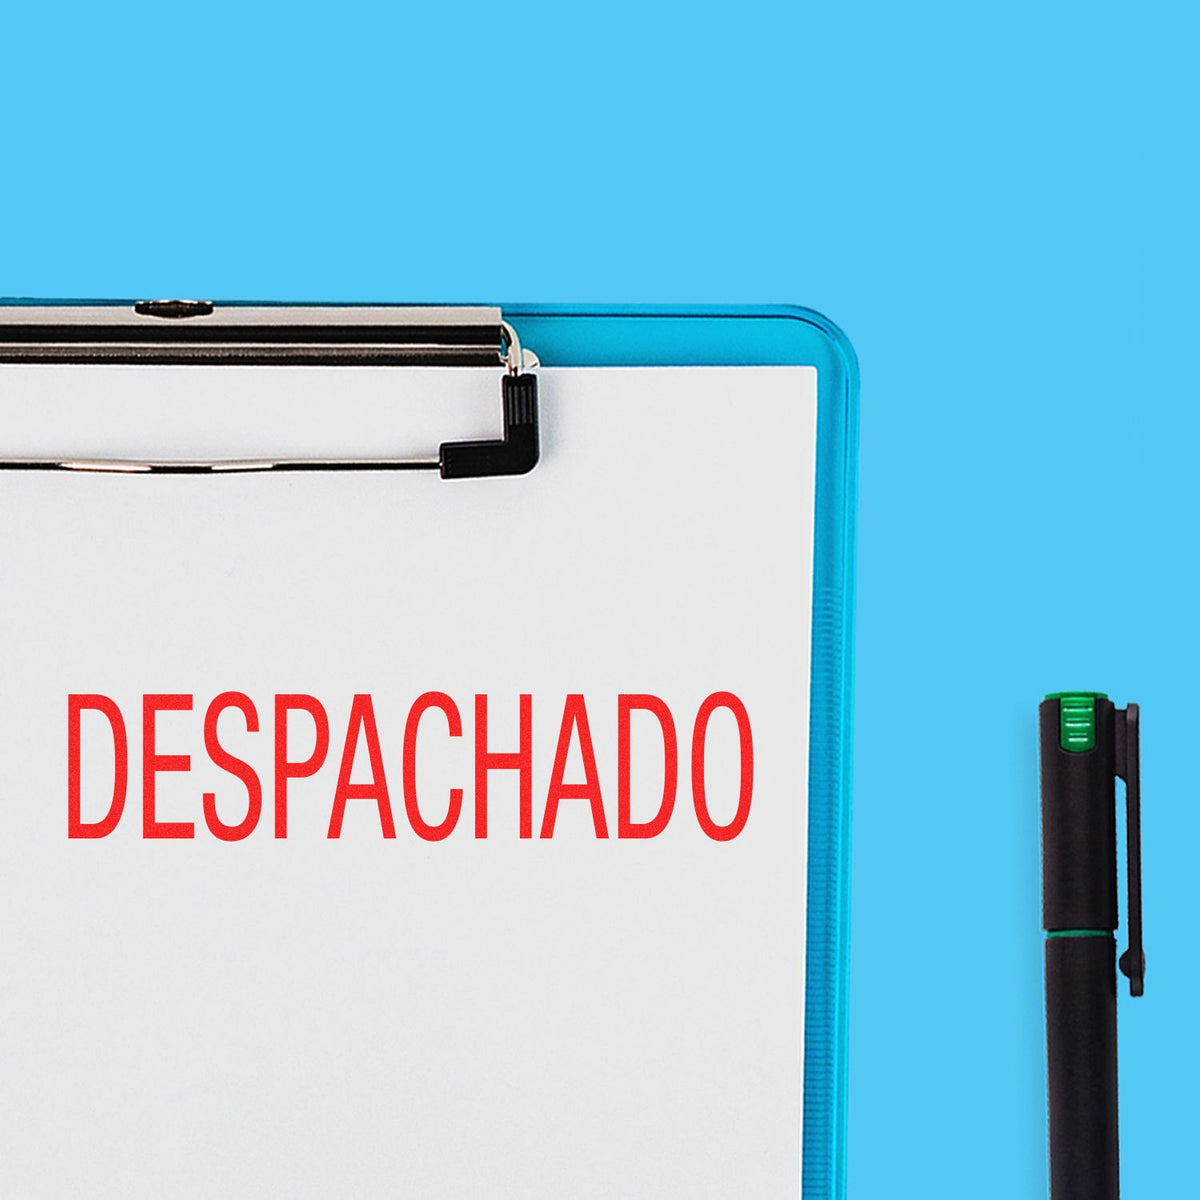 Despachado Rubber Stamp In Use Photo